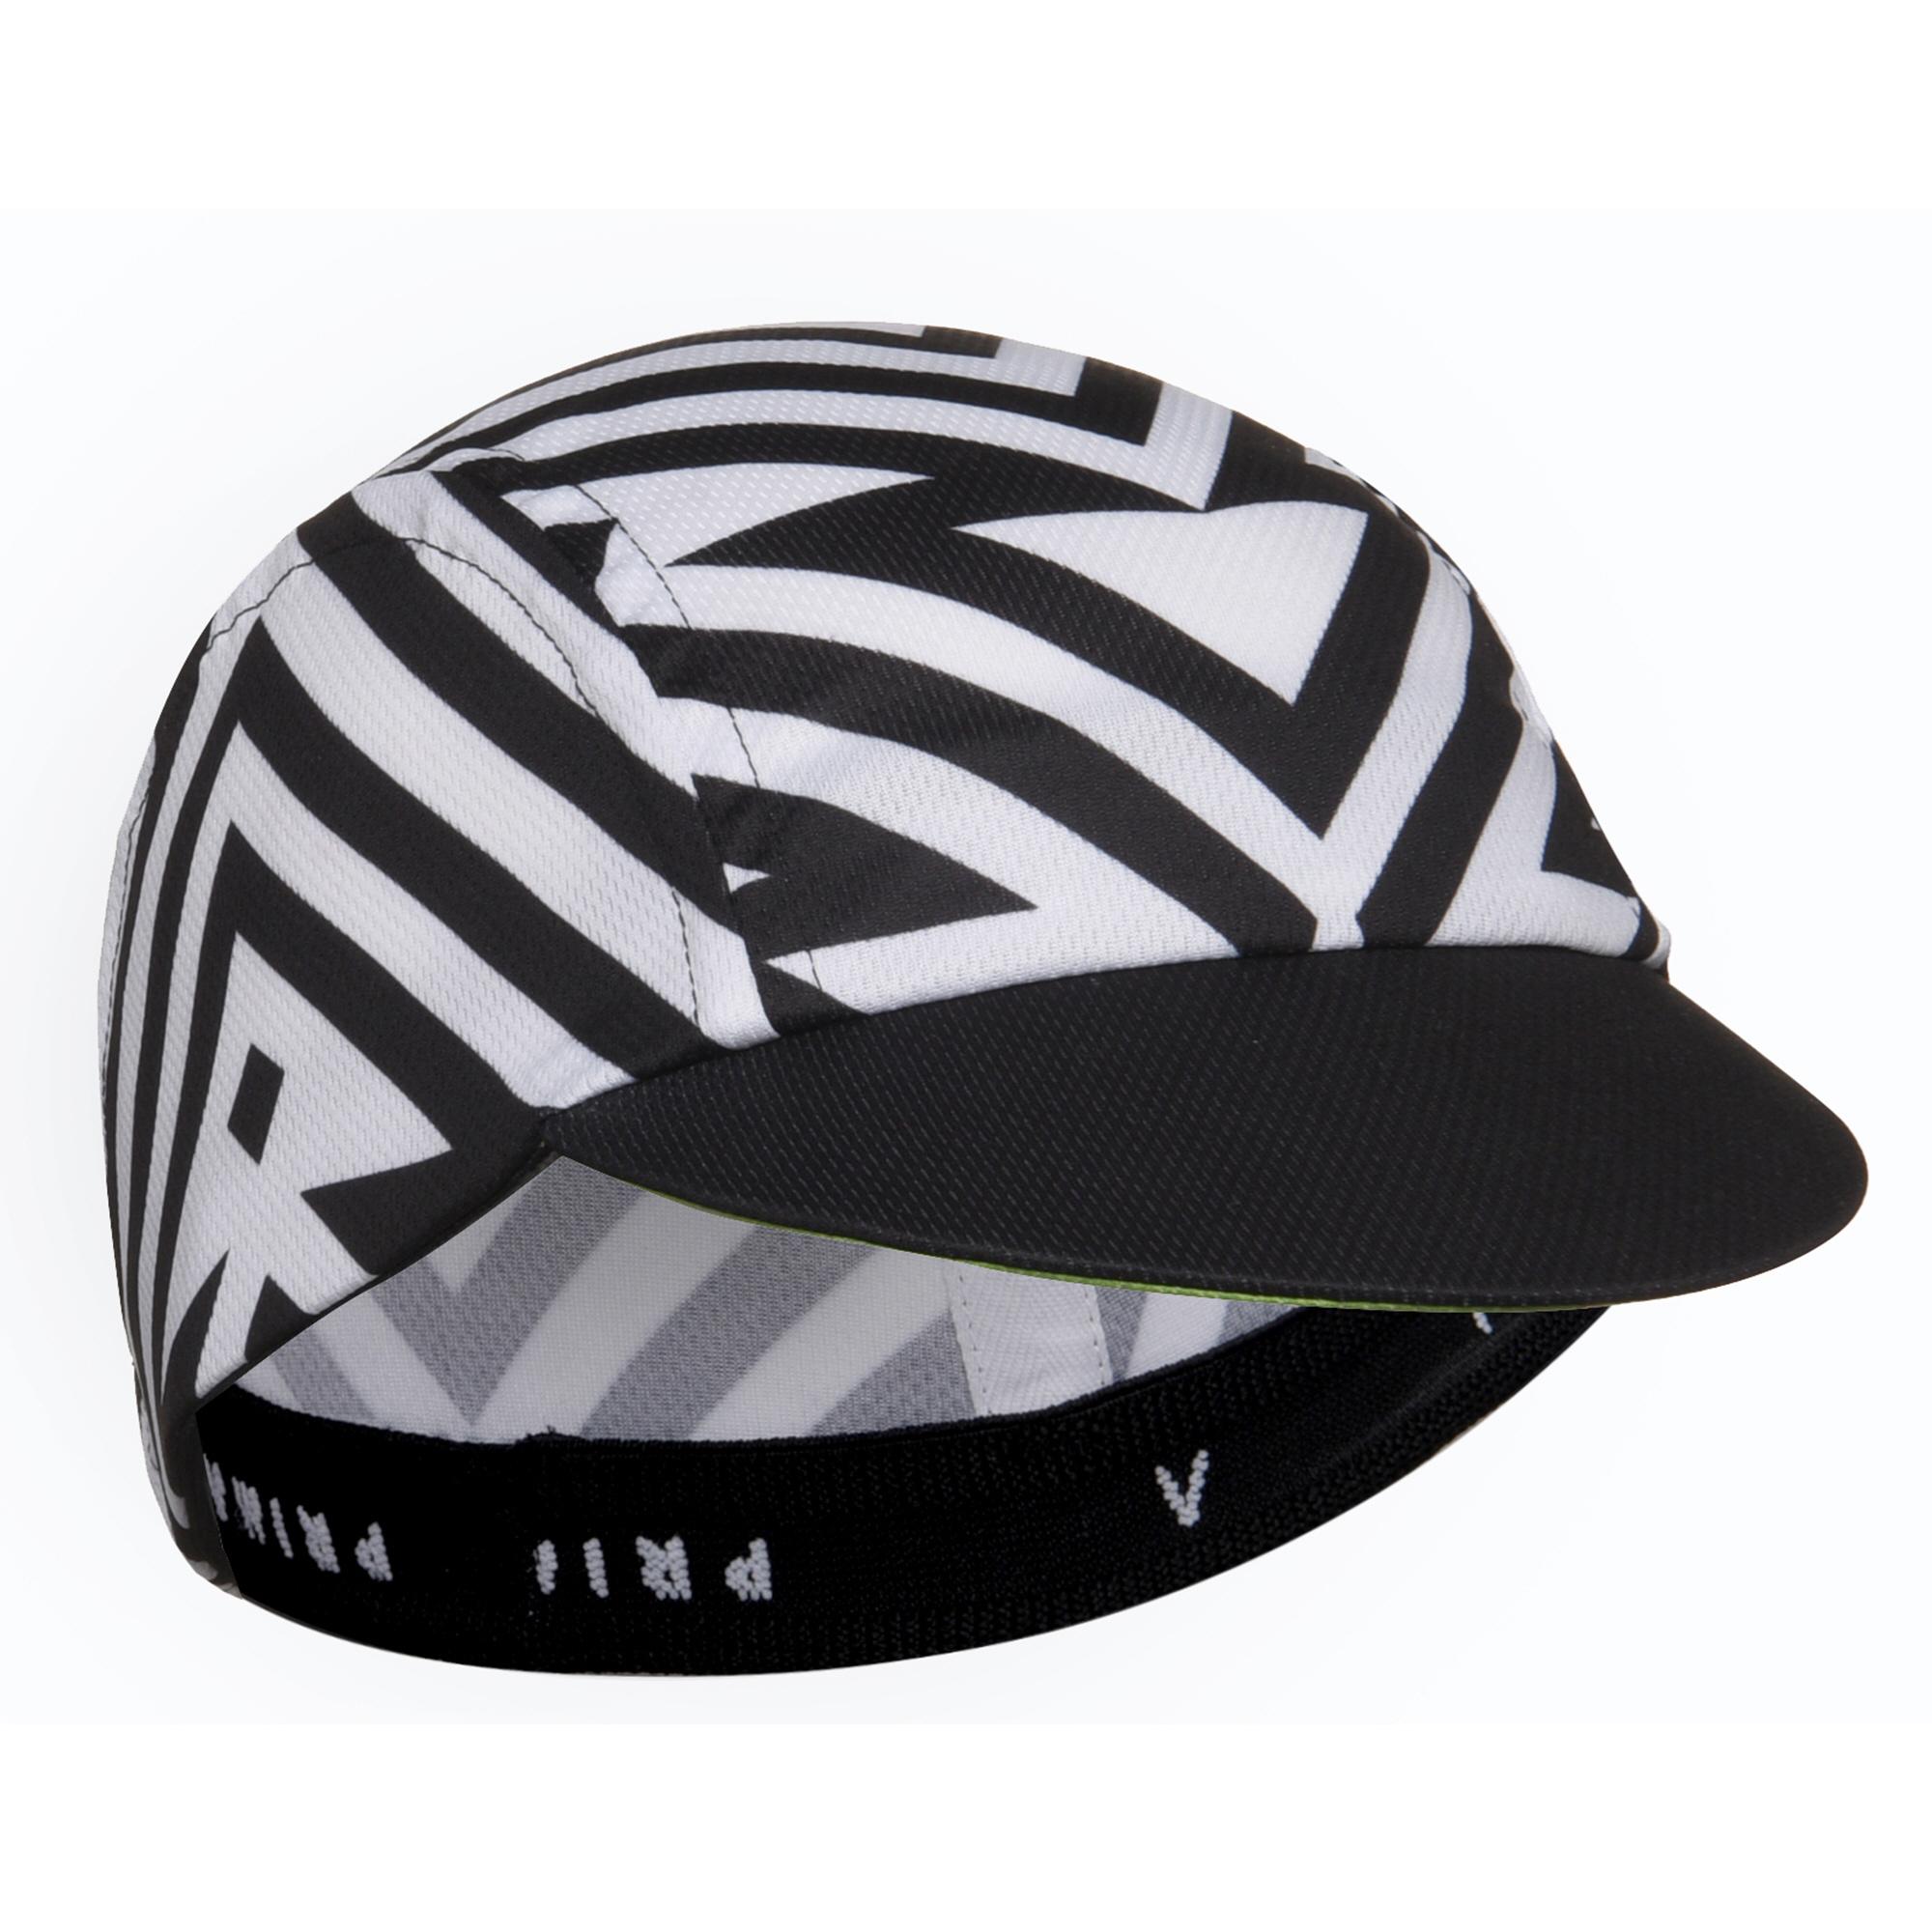 Image of Casquette cycliste Primal Electric Shock - Black/White